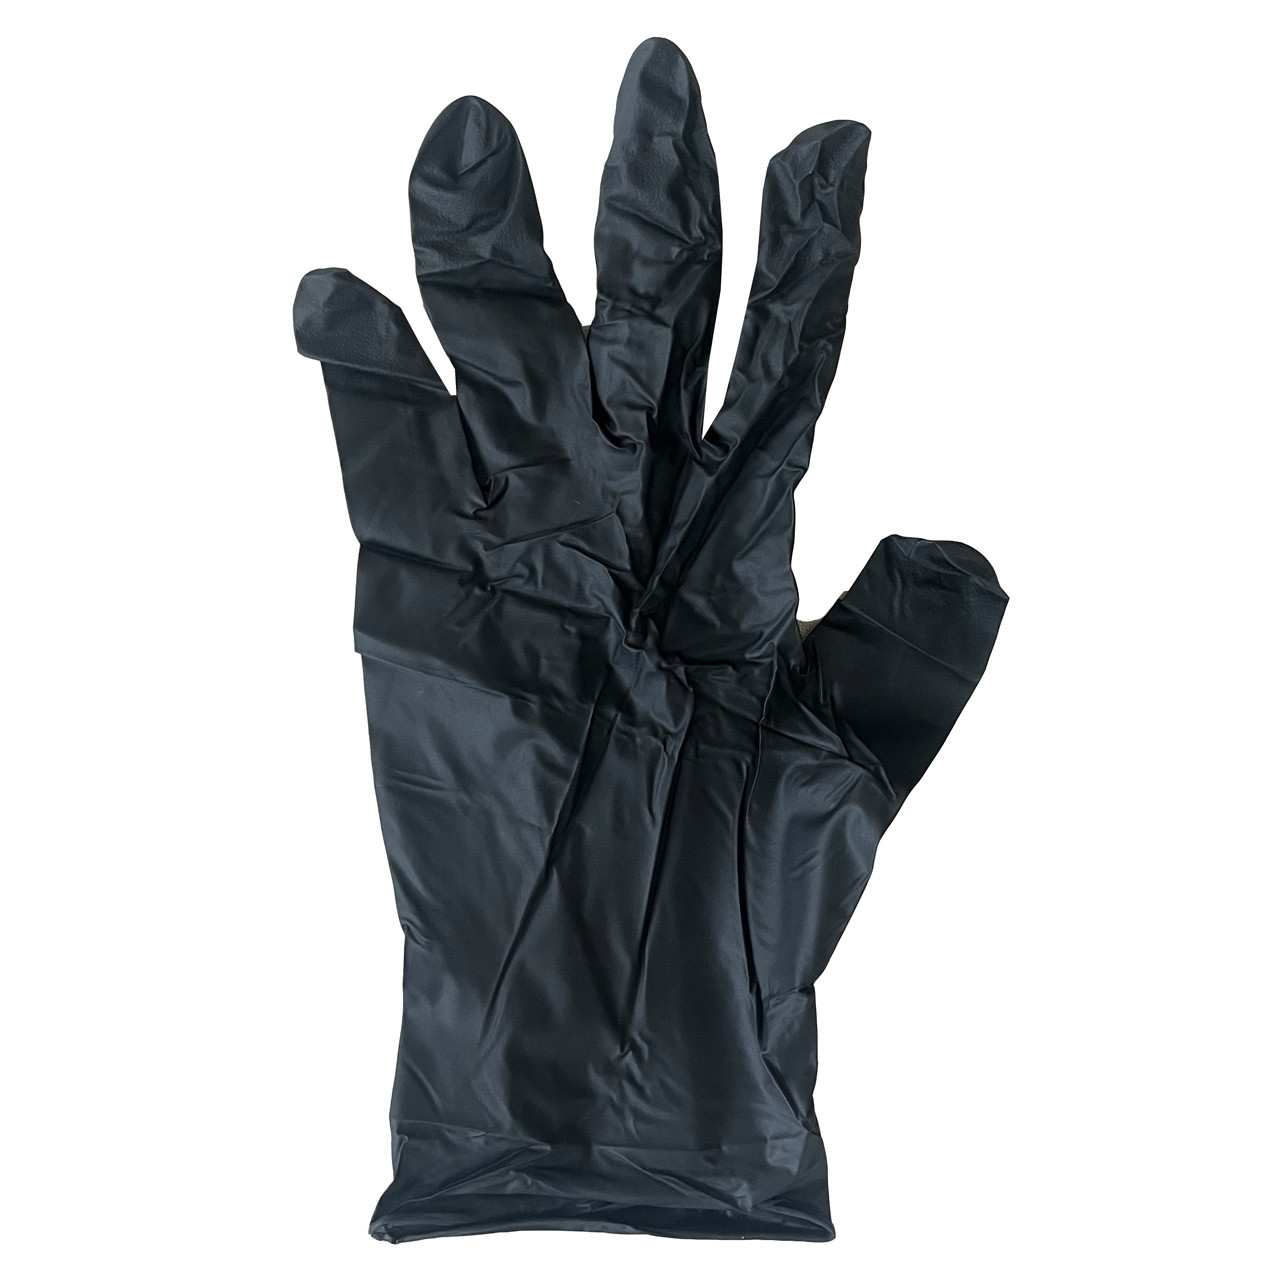 https://cdn11.bigcommerce.com/s-2c9am5e92r/images/stencil/1280x1280/products/9305/6443/GPNB441S---GlovePlus-Black-Nitrile-Gloves-100---hand-inside---lores__38336.1695059845.jpg?c=2